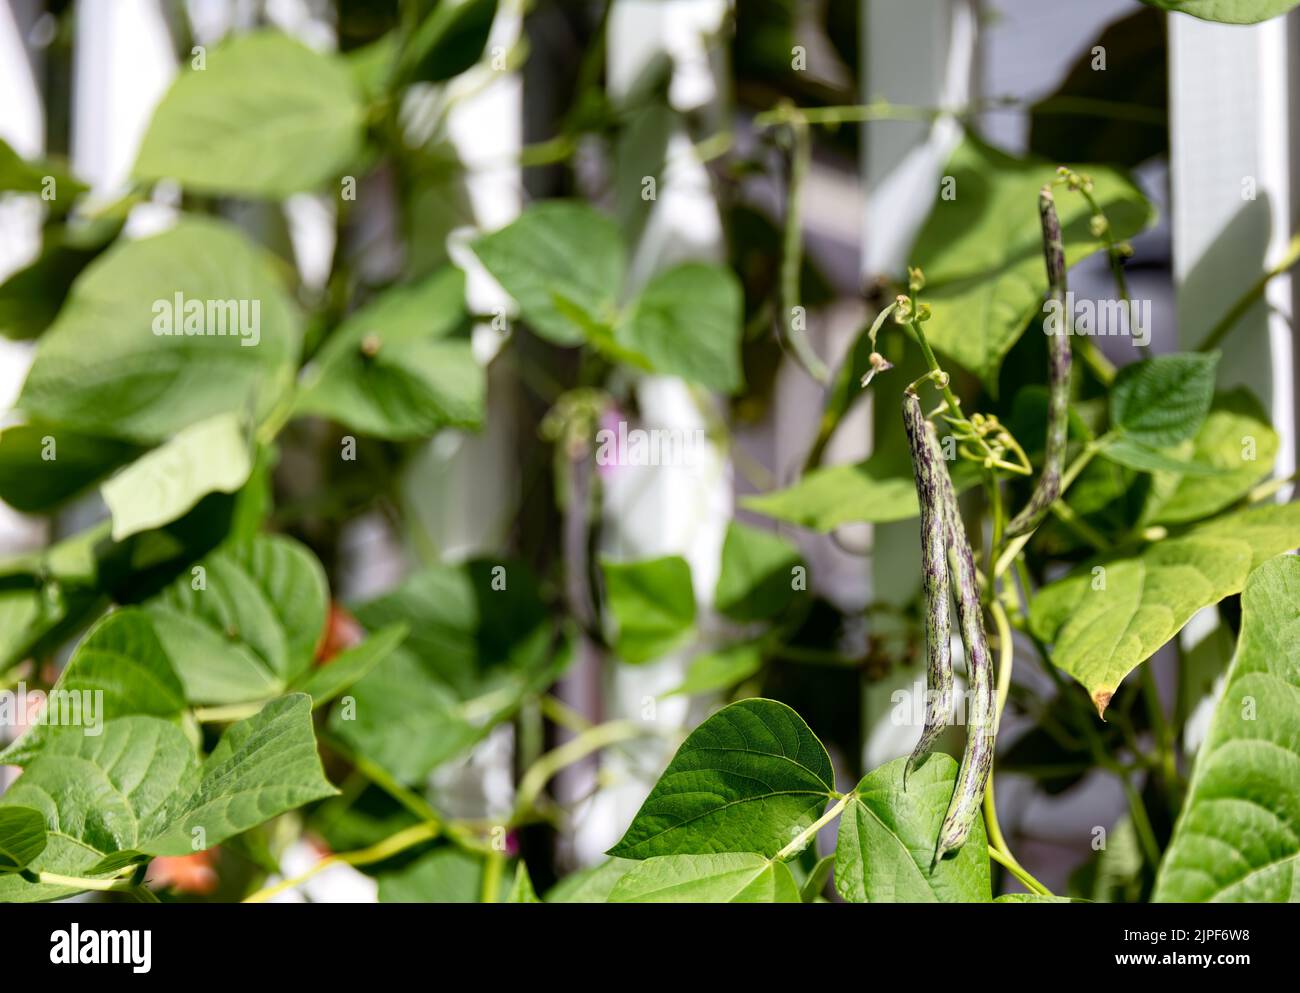 Select focus on green rattlesnake pole beans hanging from stalk in home garden Stock Photo